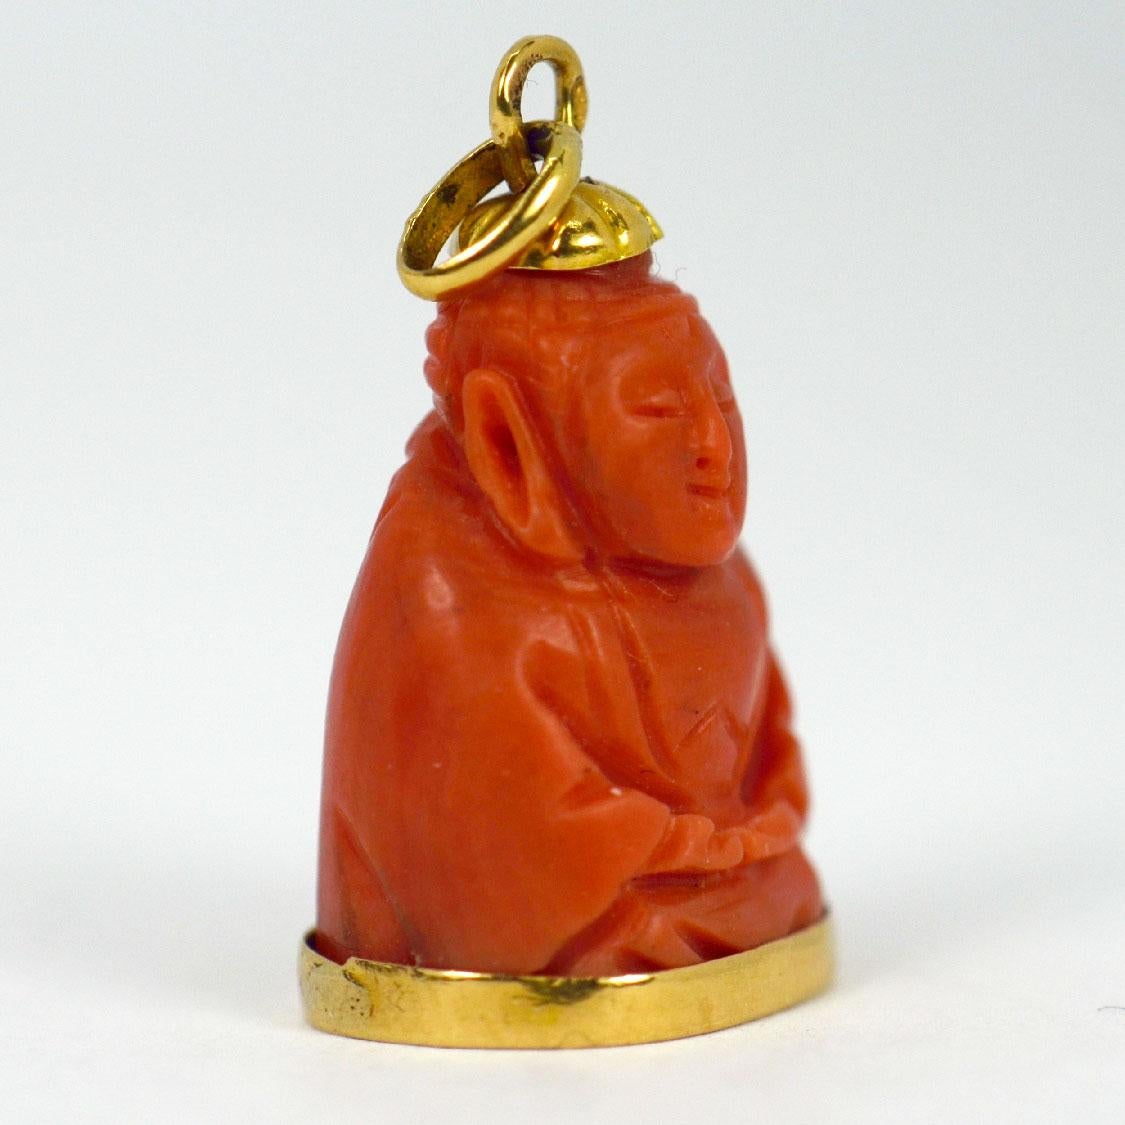 An 18 karat (18K) yellow gold charm pendant designed as a carved coral Buddha. Stamped with a provincial mark for French manufacture  and 18 karat gold with an unknown makers mark.

Dimensions: 2.5 x 1.5 x 1.05 cm (not including jump ring)
Weight: